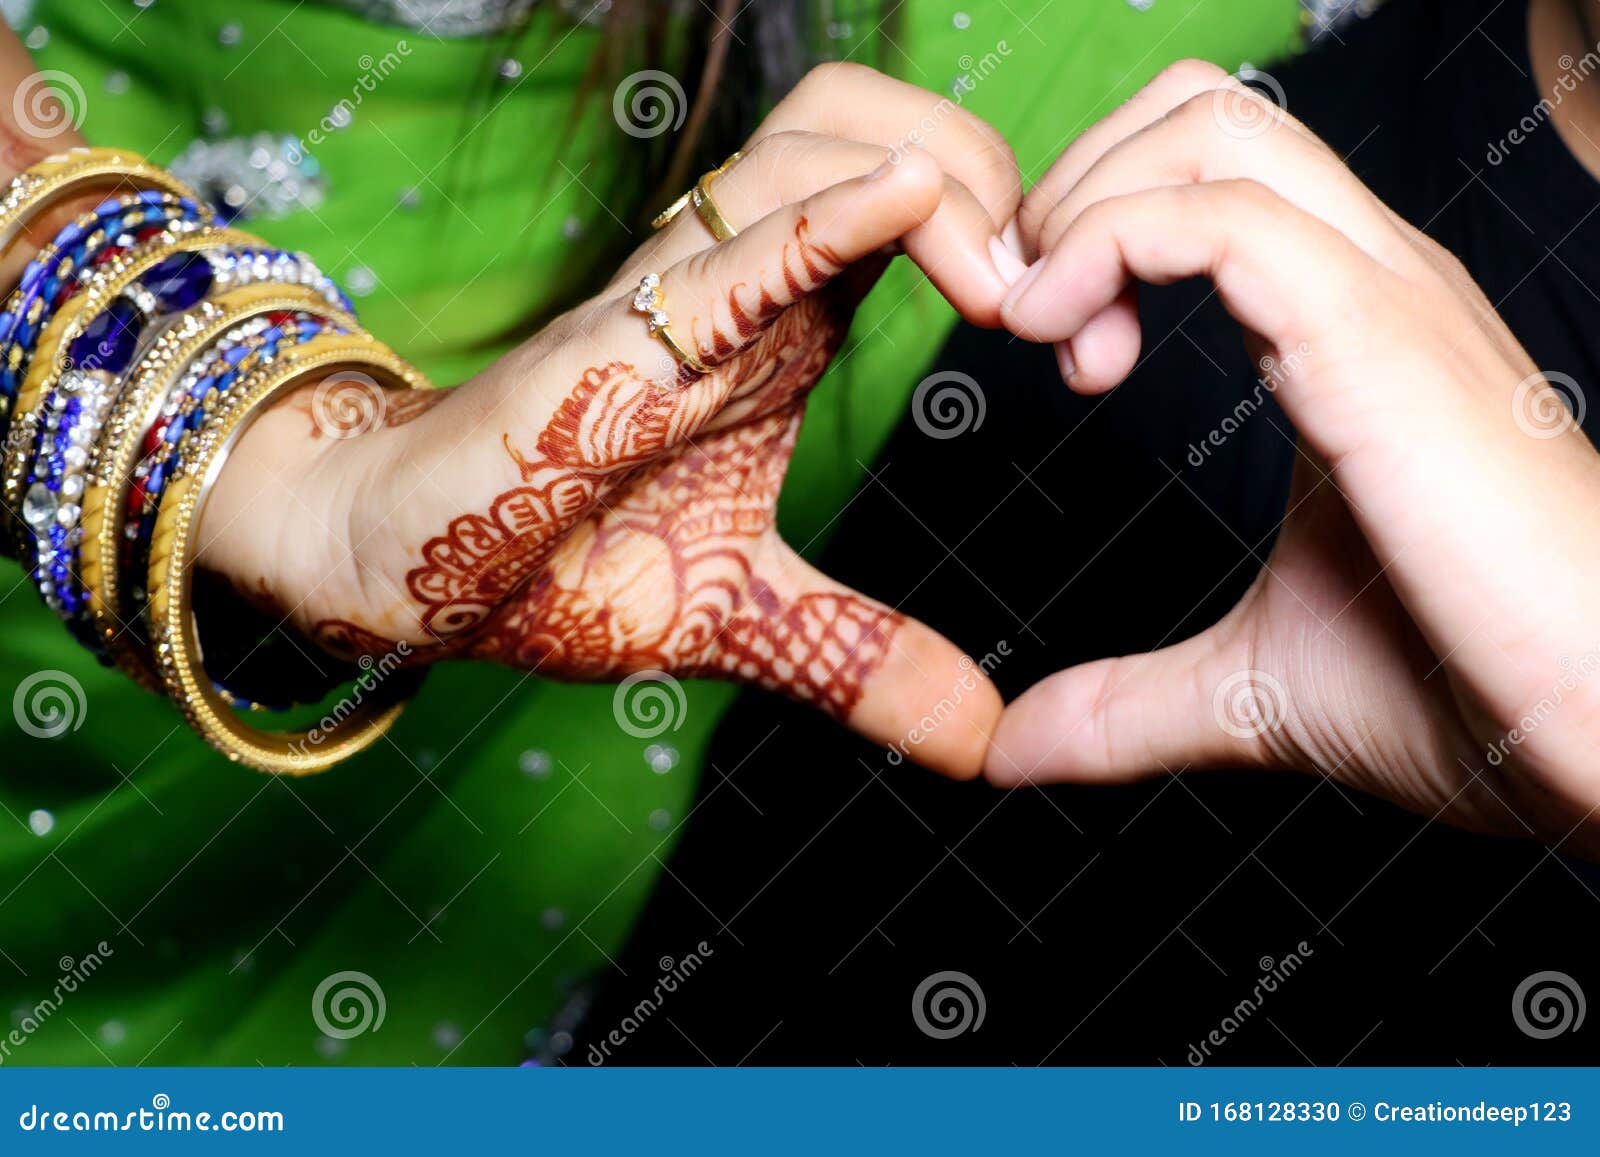 1 165 Indian Couple Holding Hands Photos Free Royalty Free Stock Photos From Dreamstime